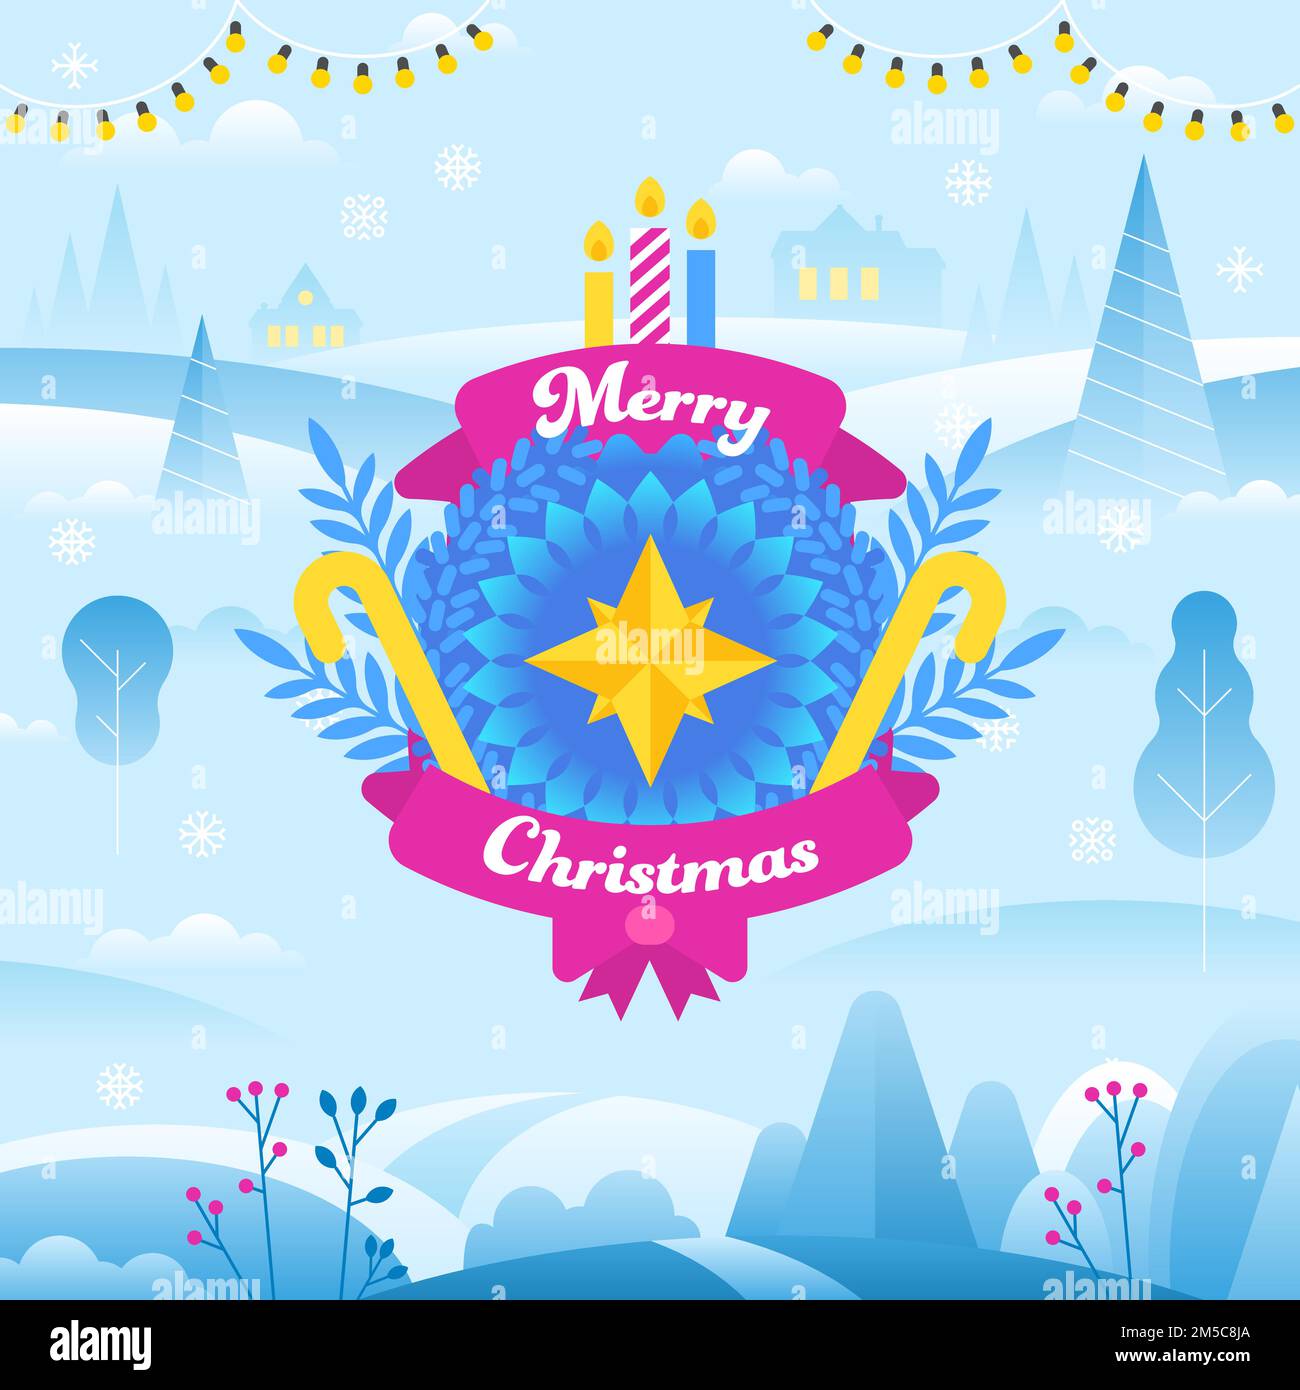 Merry Christmas and Happy New Year  greeting card template. Winter landscape with with sky, heavy snowfall, snowflakes in different shapes and forms. Stock Vector